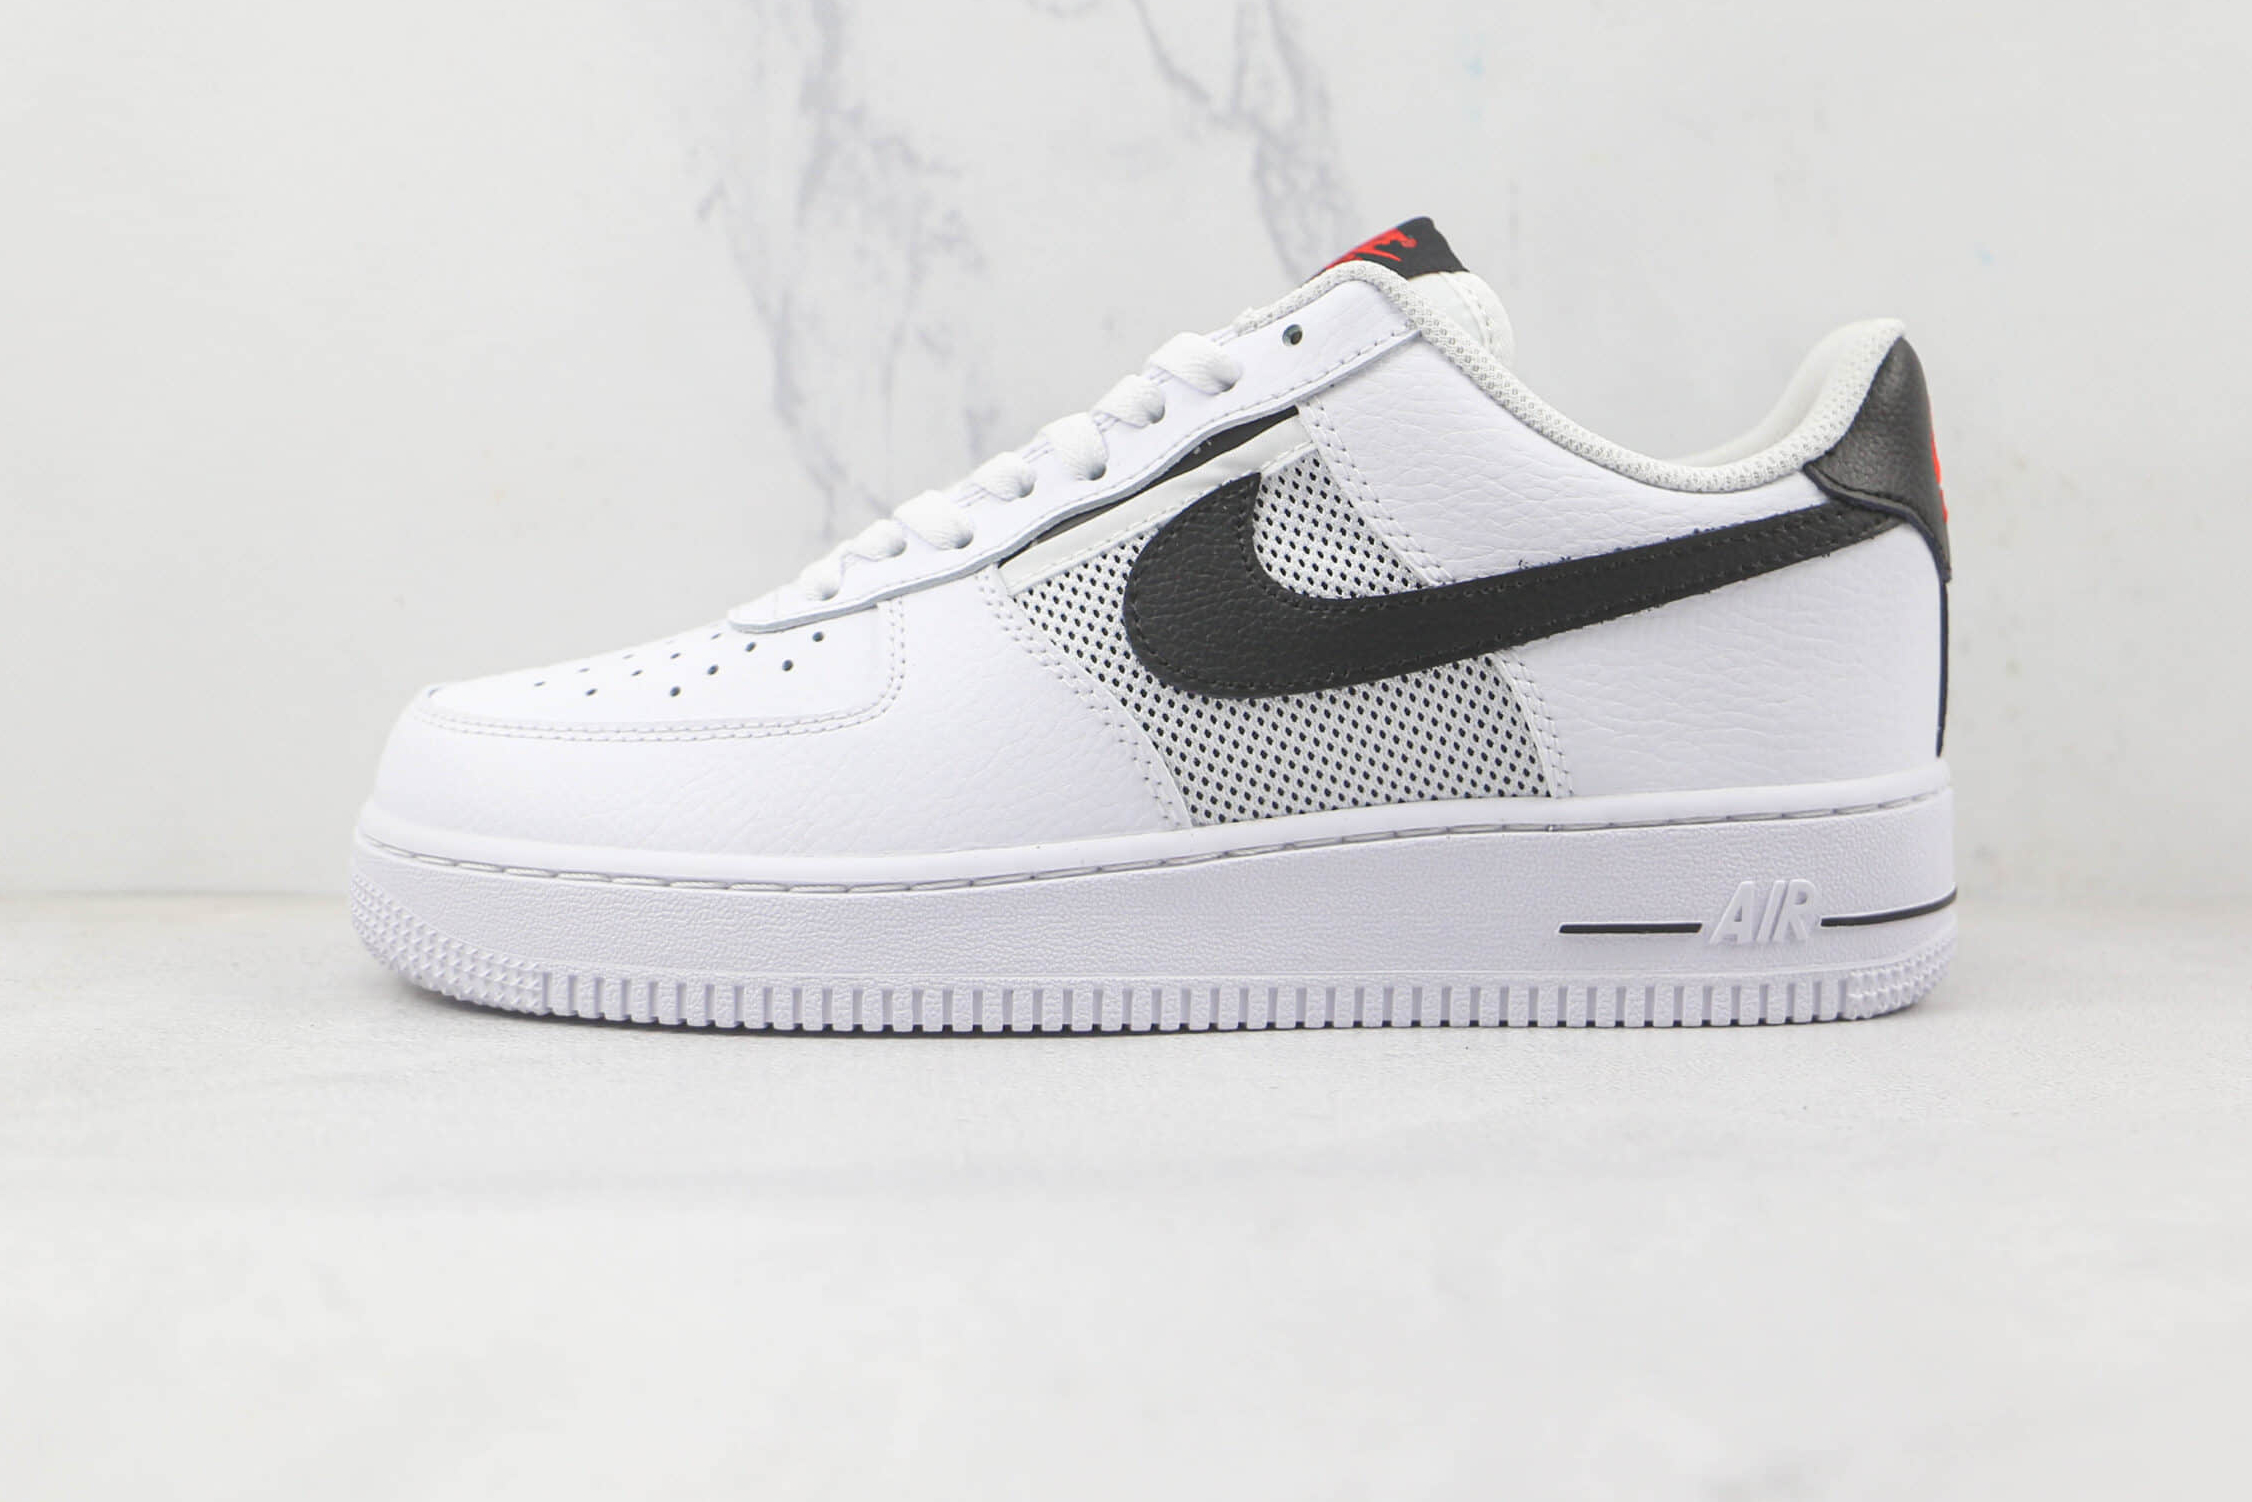 Nike Air Force 1 Low '07 LV8 White Black DH7567-100 | Classic Sneakers